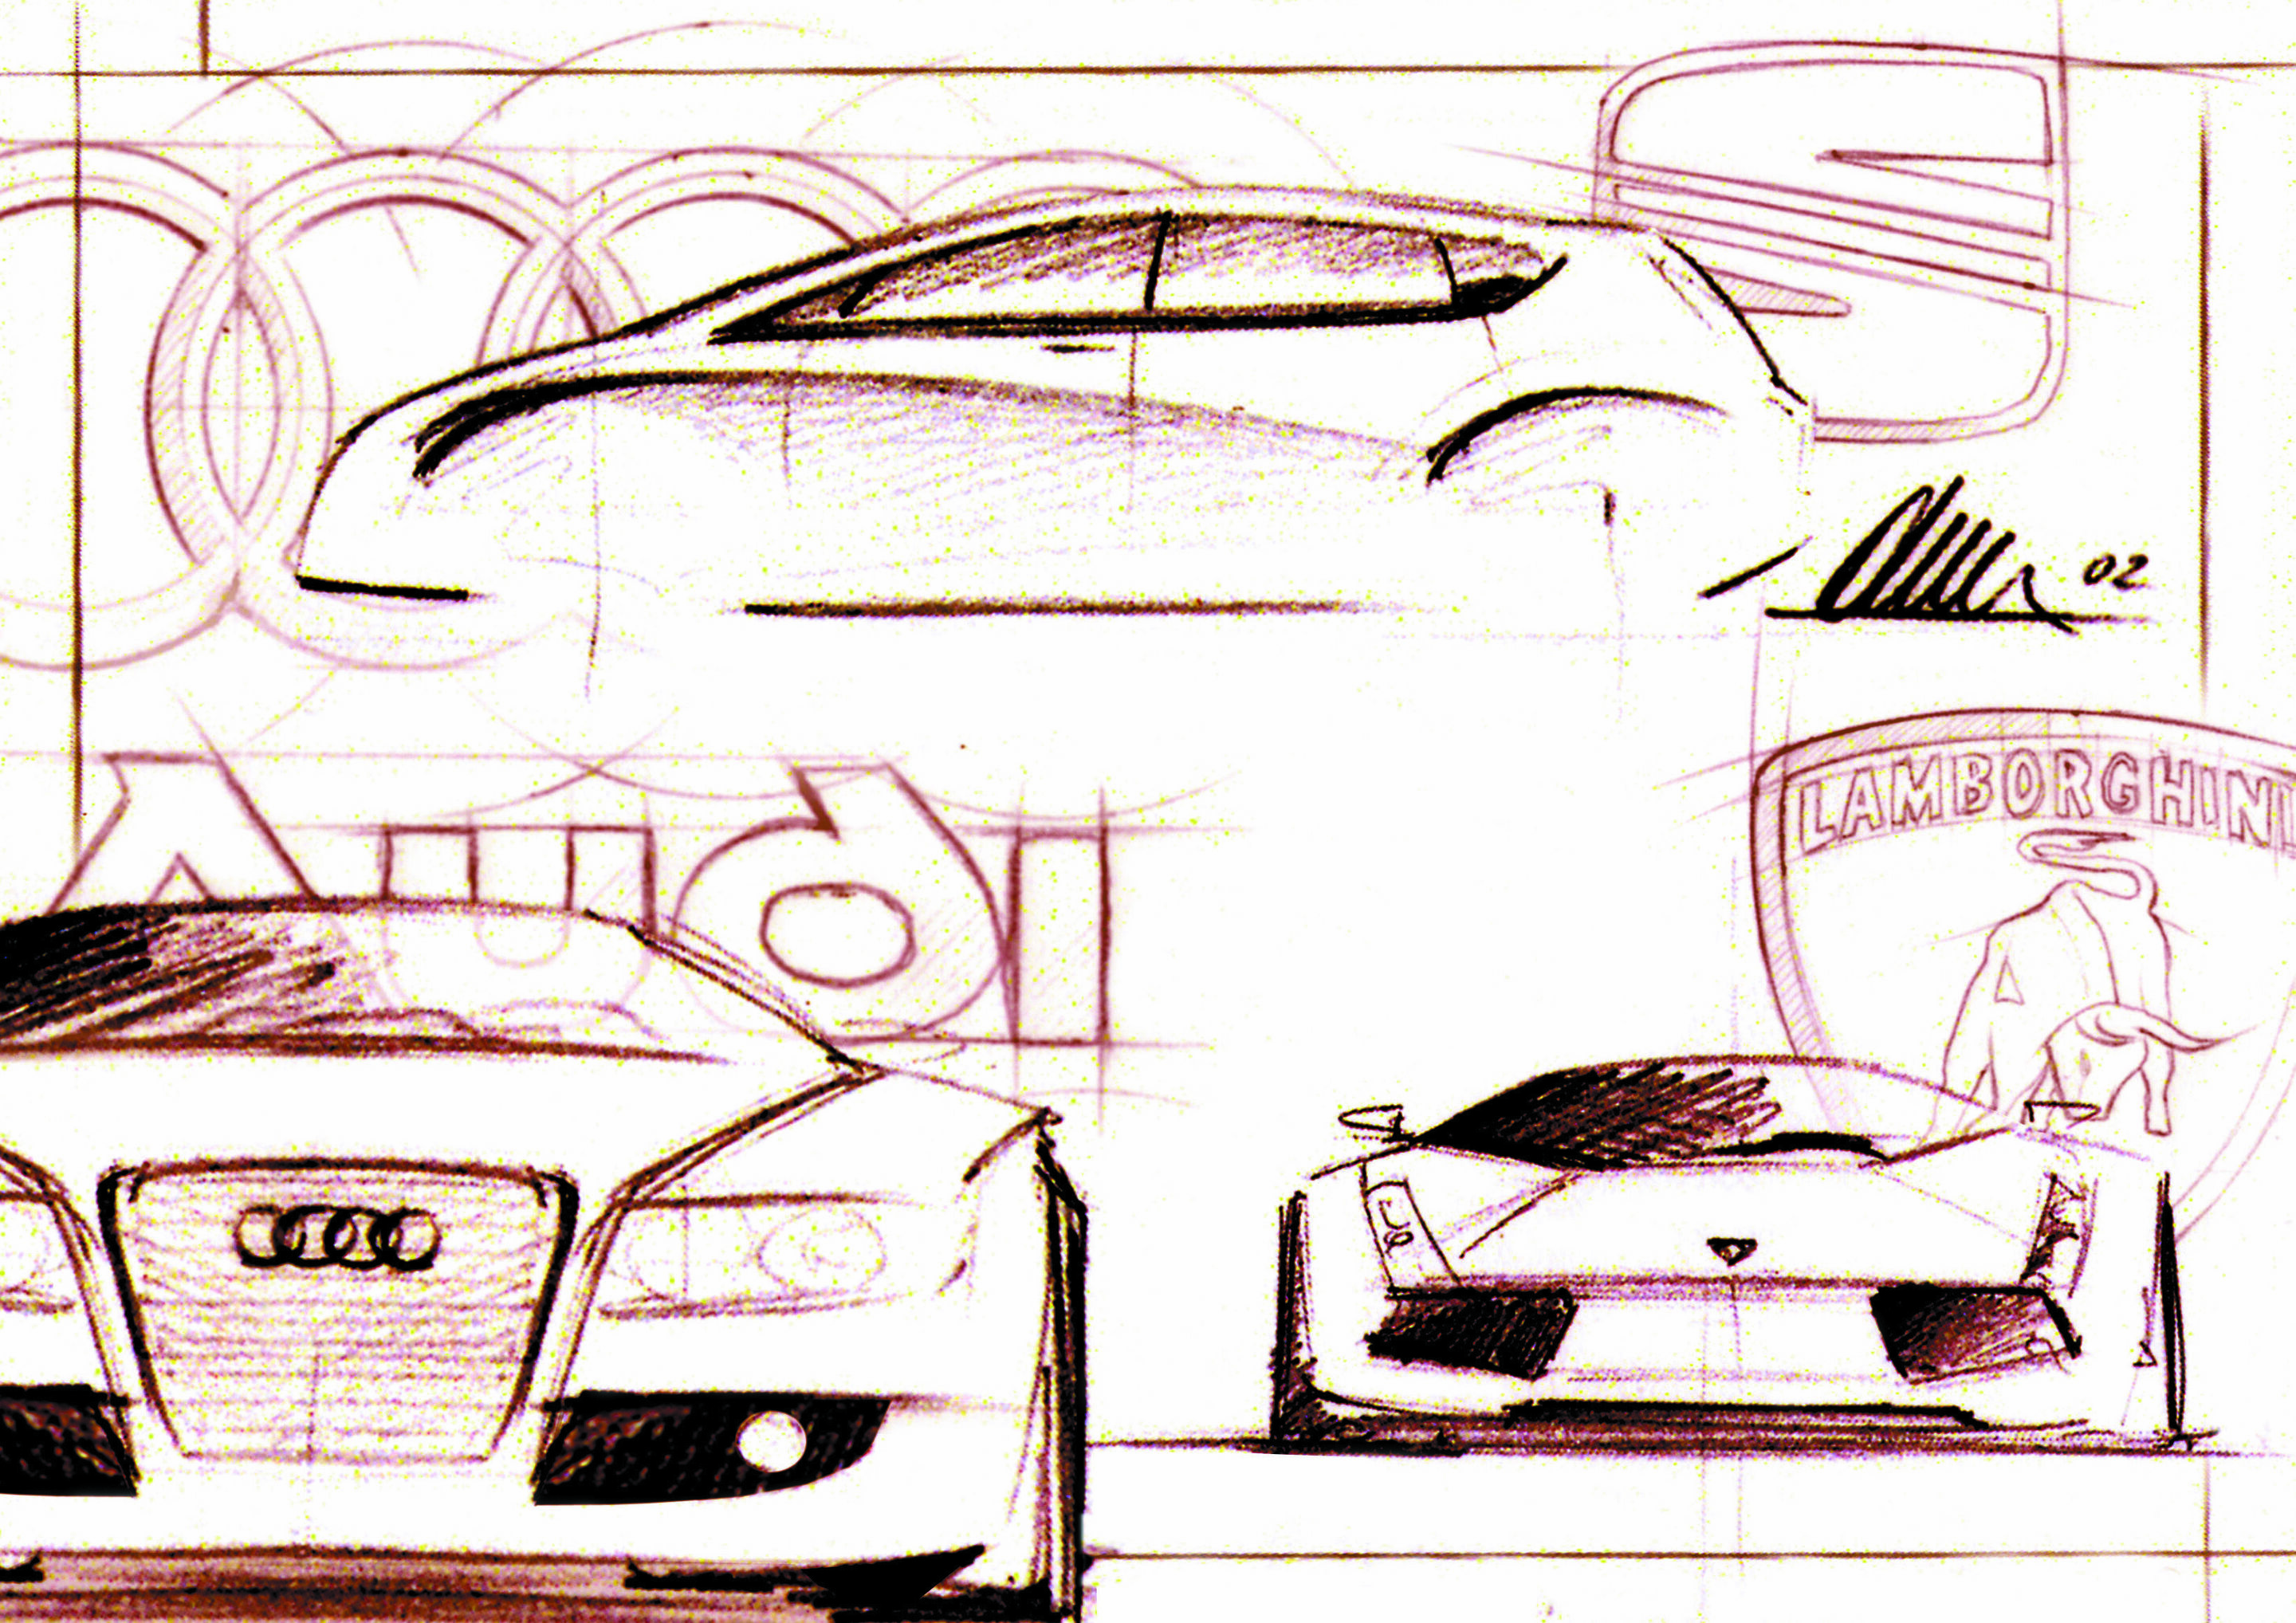 The Audi brand group united in a design sketch